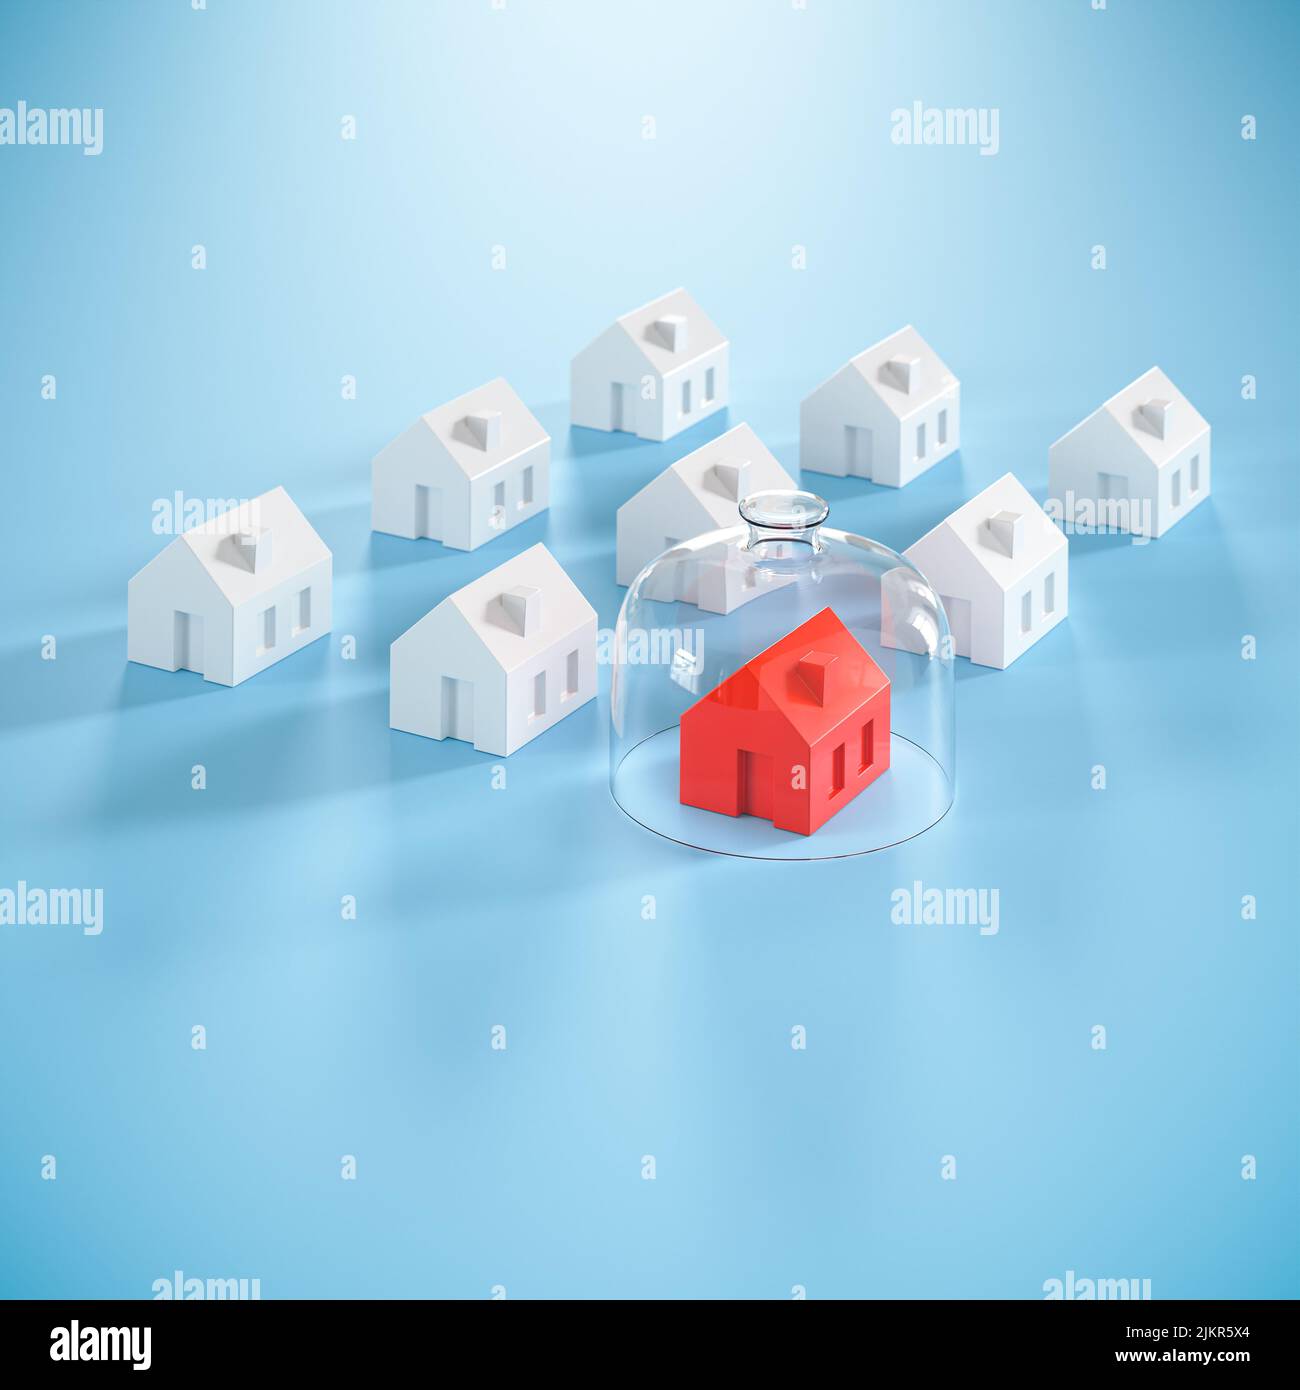 Proptecting your property concept - insurance, surveillance. Several model houses, one in red with a glass dome. Stock Photo